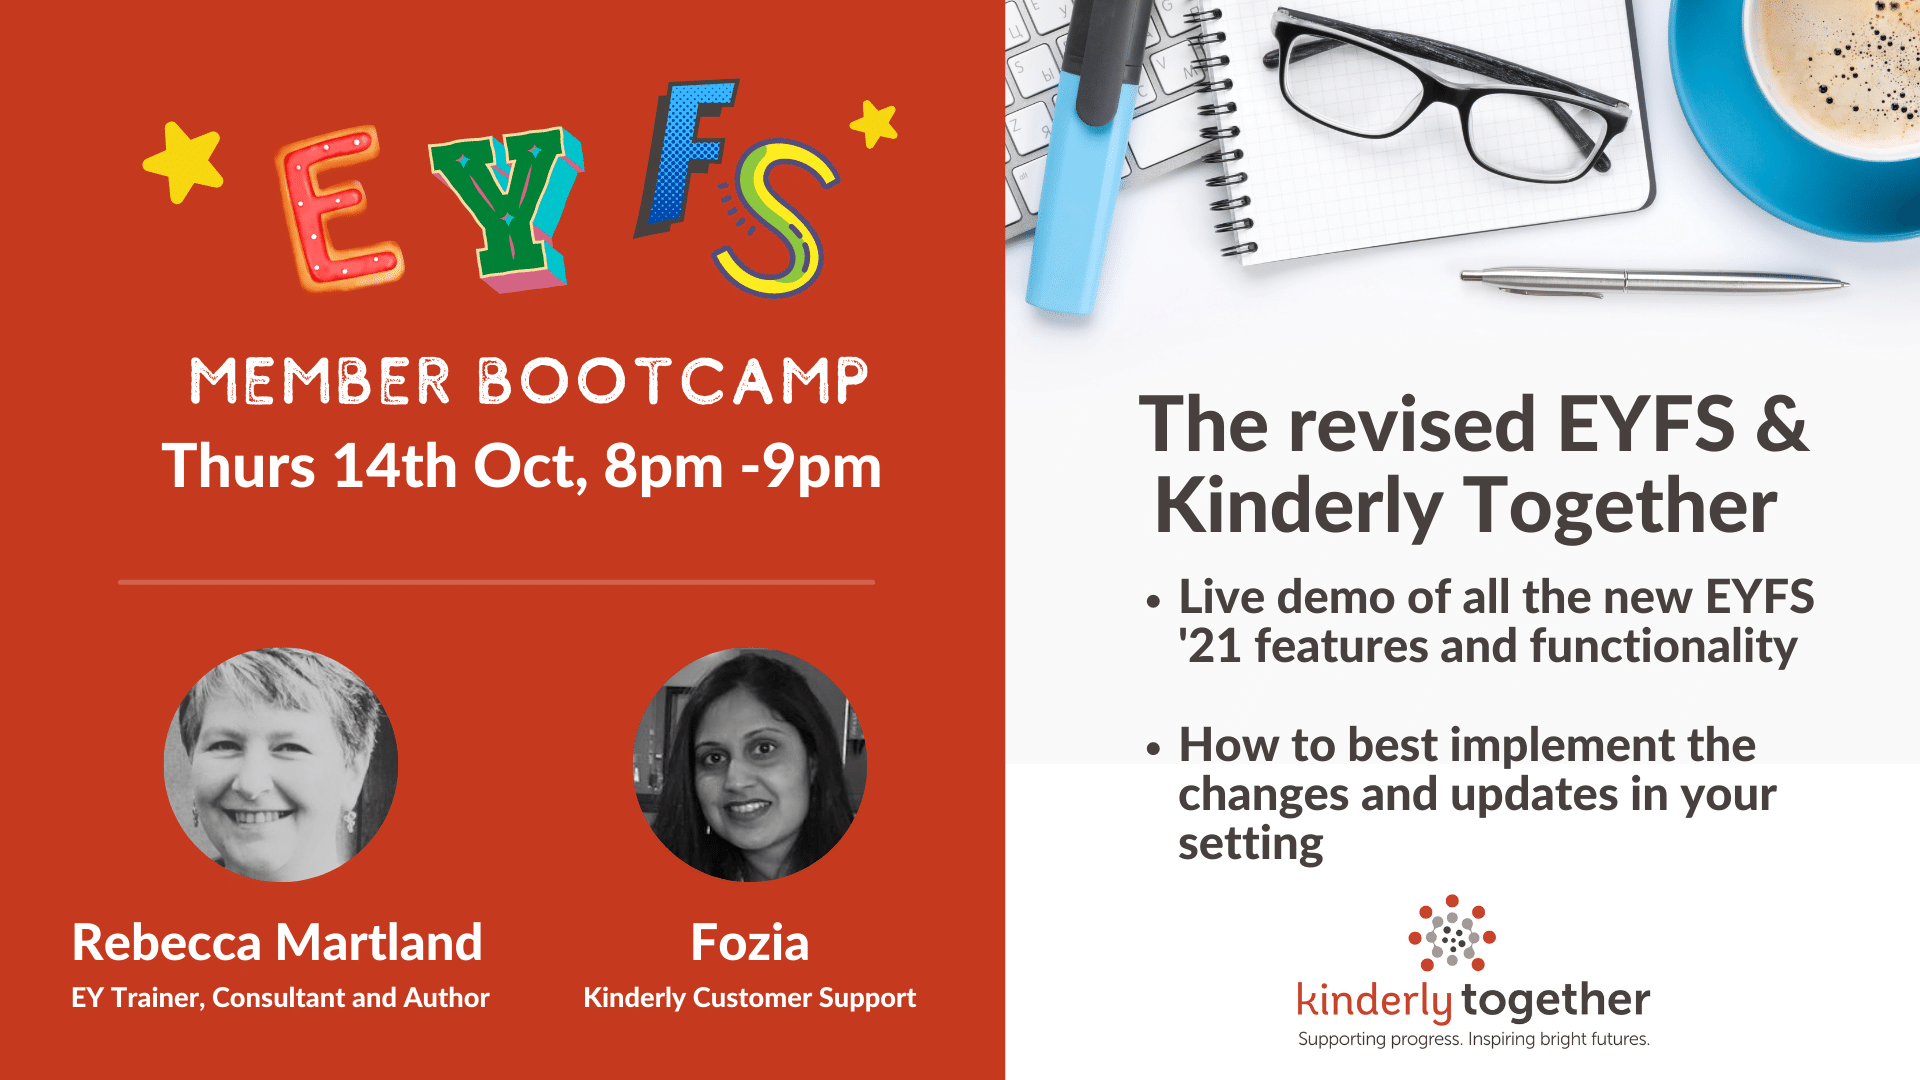 Kinderly Together Bootcamp for members